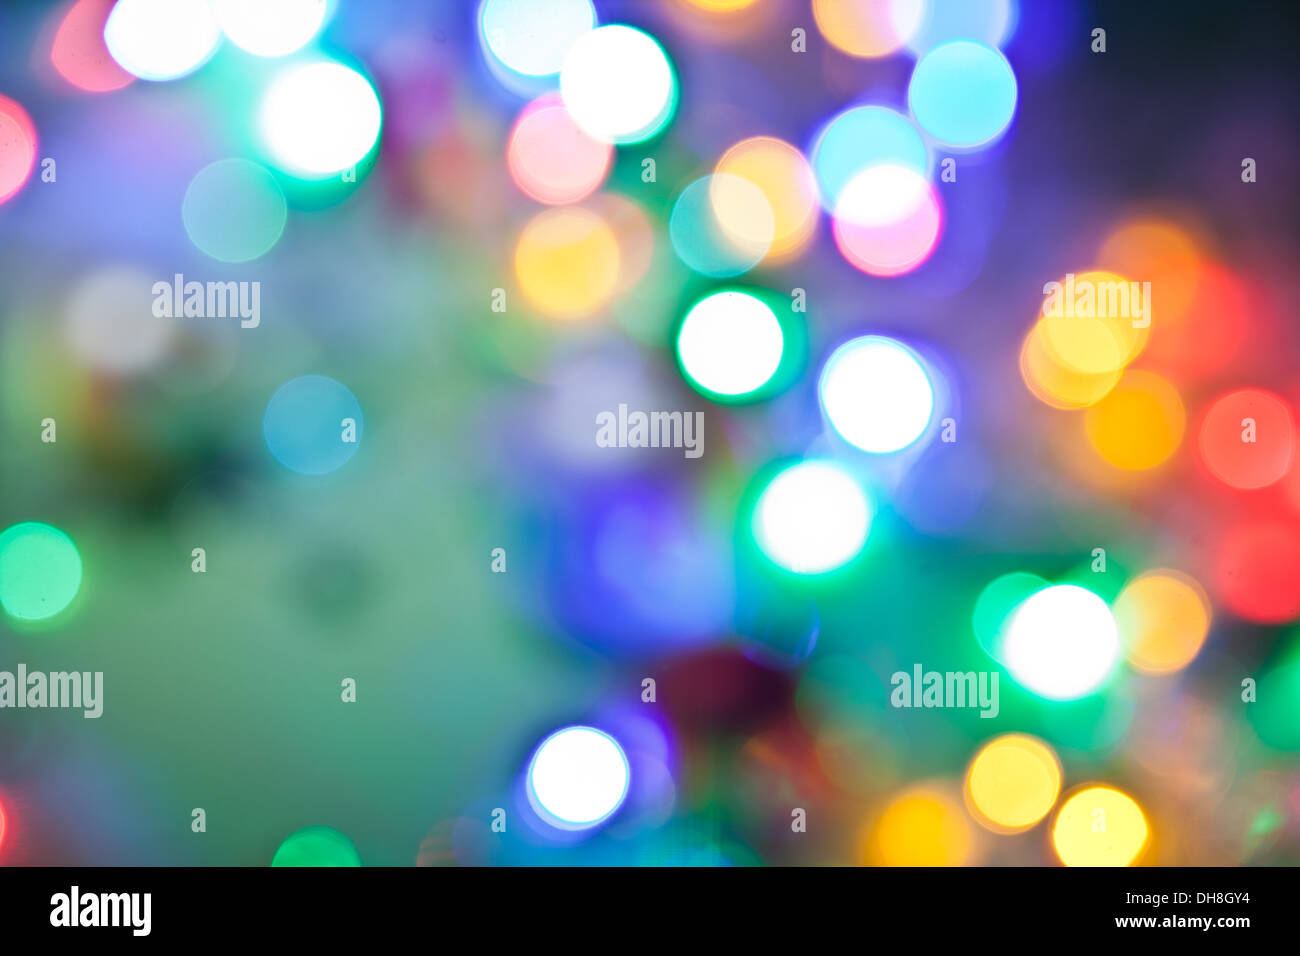 Fairy Lights Images Free Photos, PNG Stickers, Wallpapers, 41% OFF